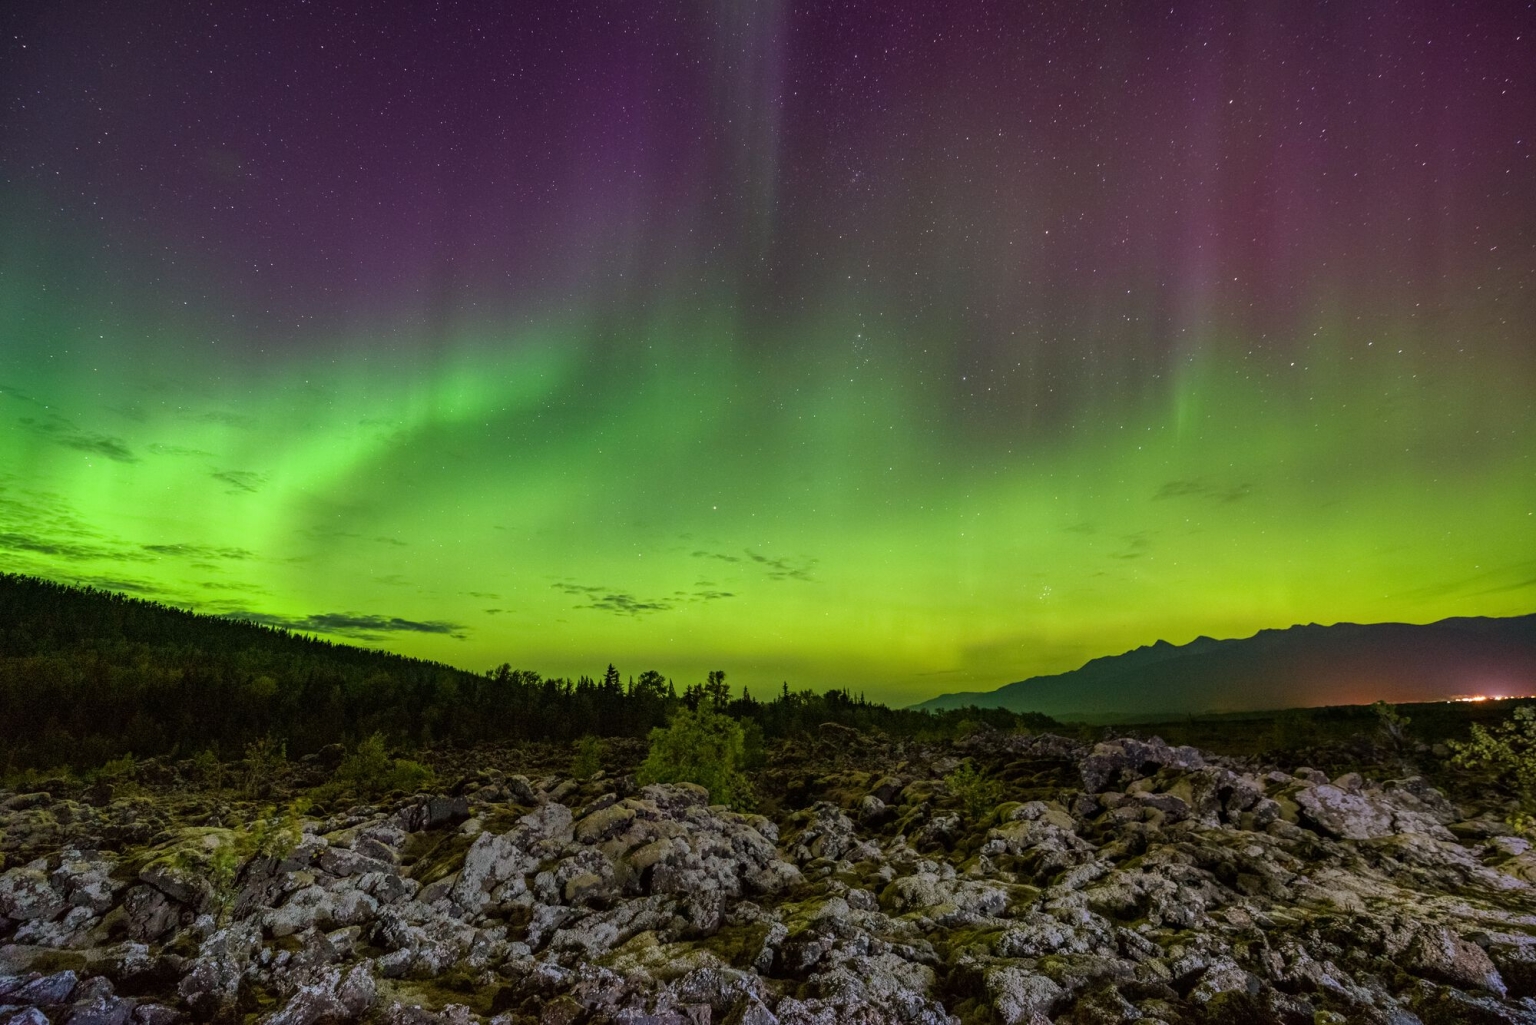 The green and purple Northern Lights illuminate the sky in 